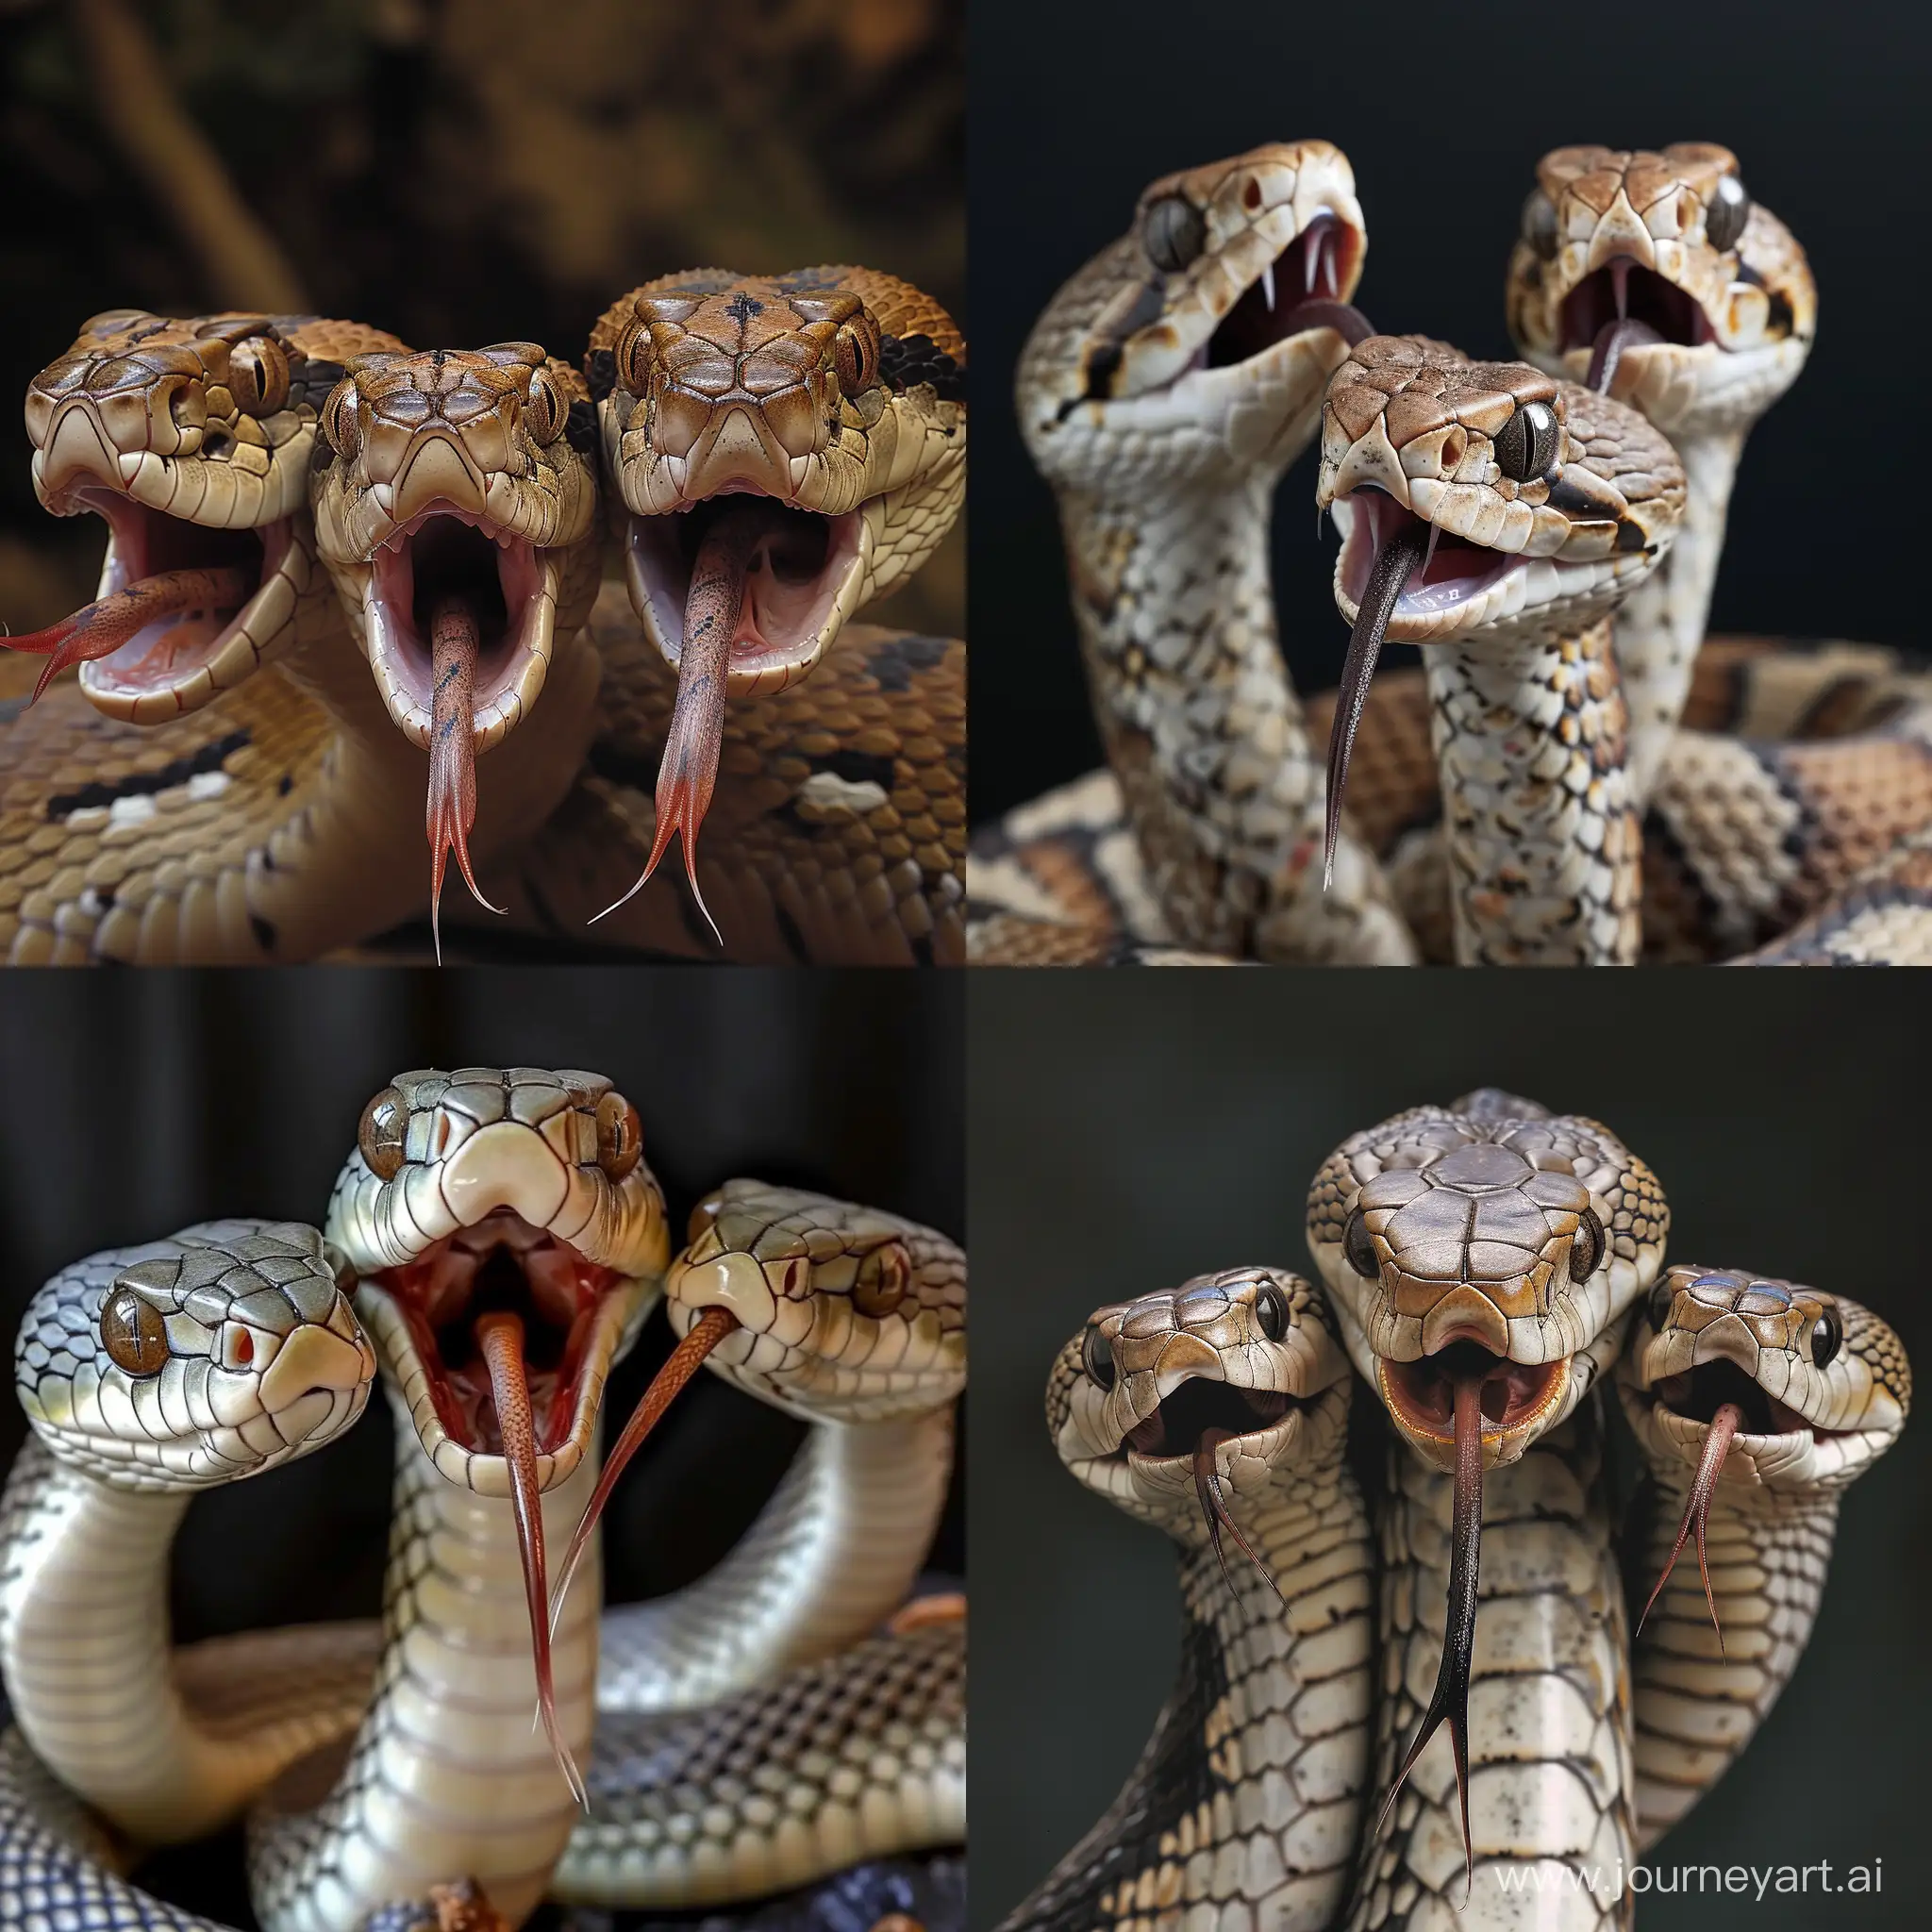 ThreeHeaded-Snake-with-Multiple-Tongues